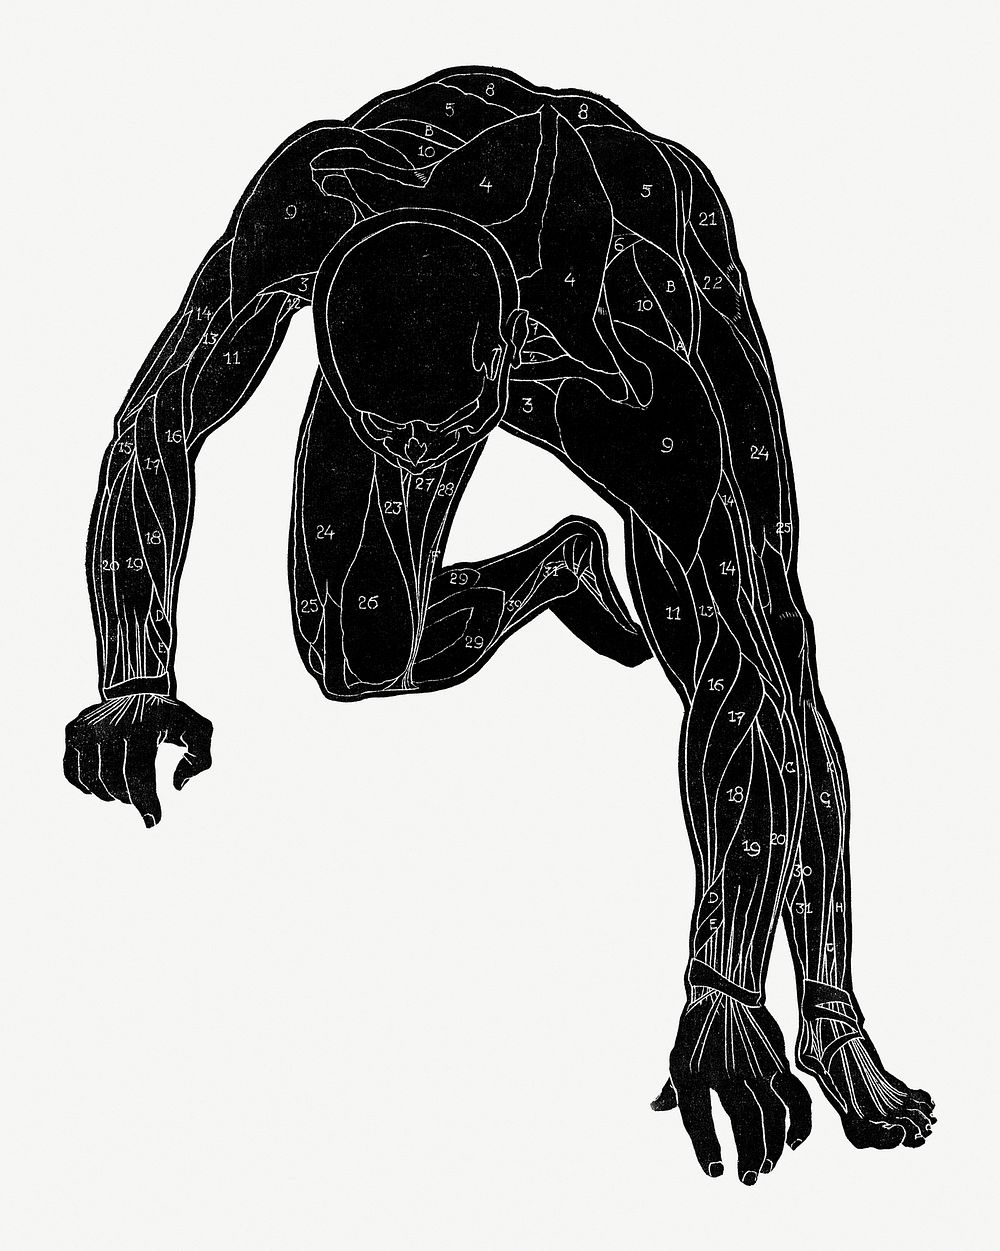 Human anatomy psd in silhouette print, remixed from artworks by Reijer Stolk